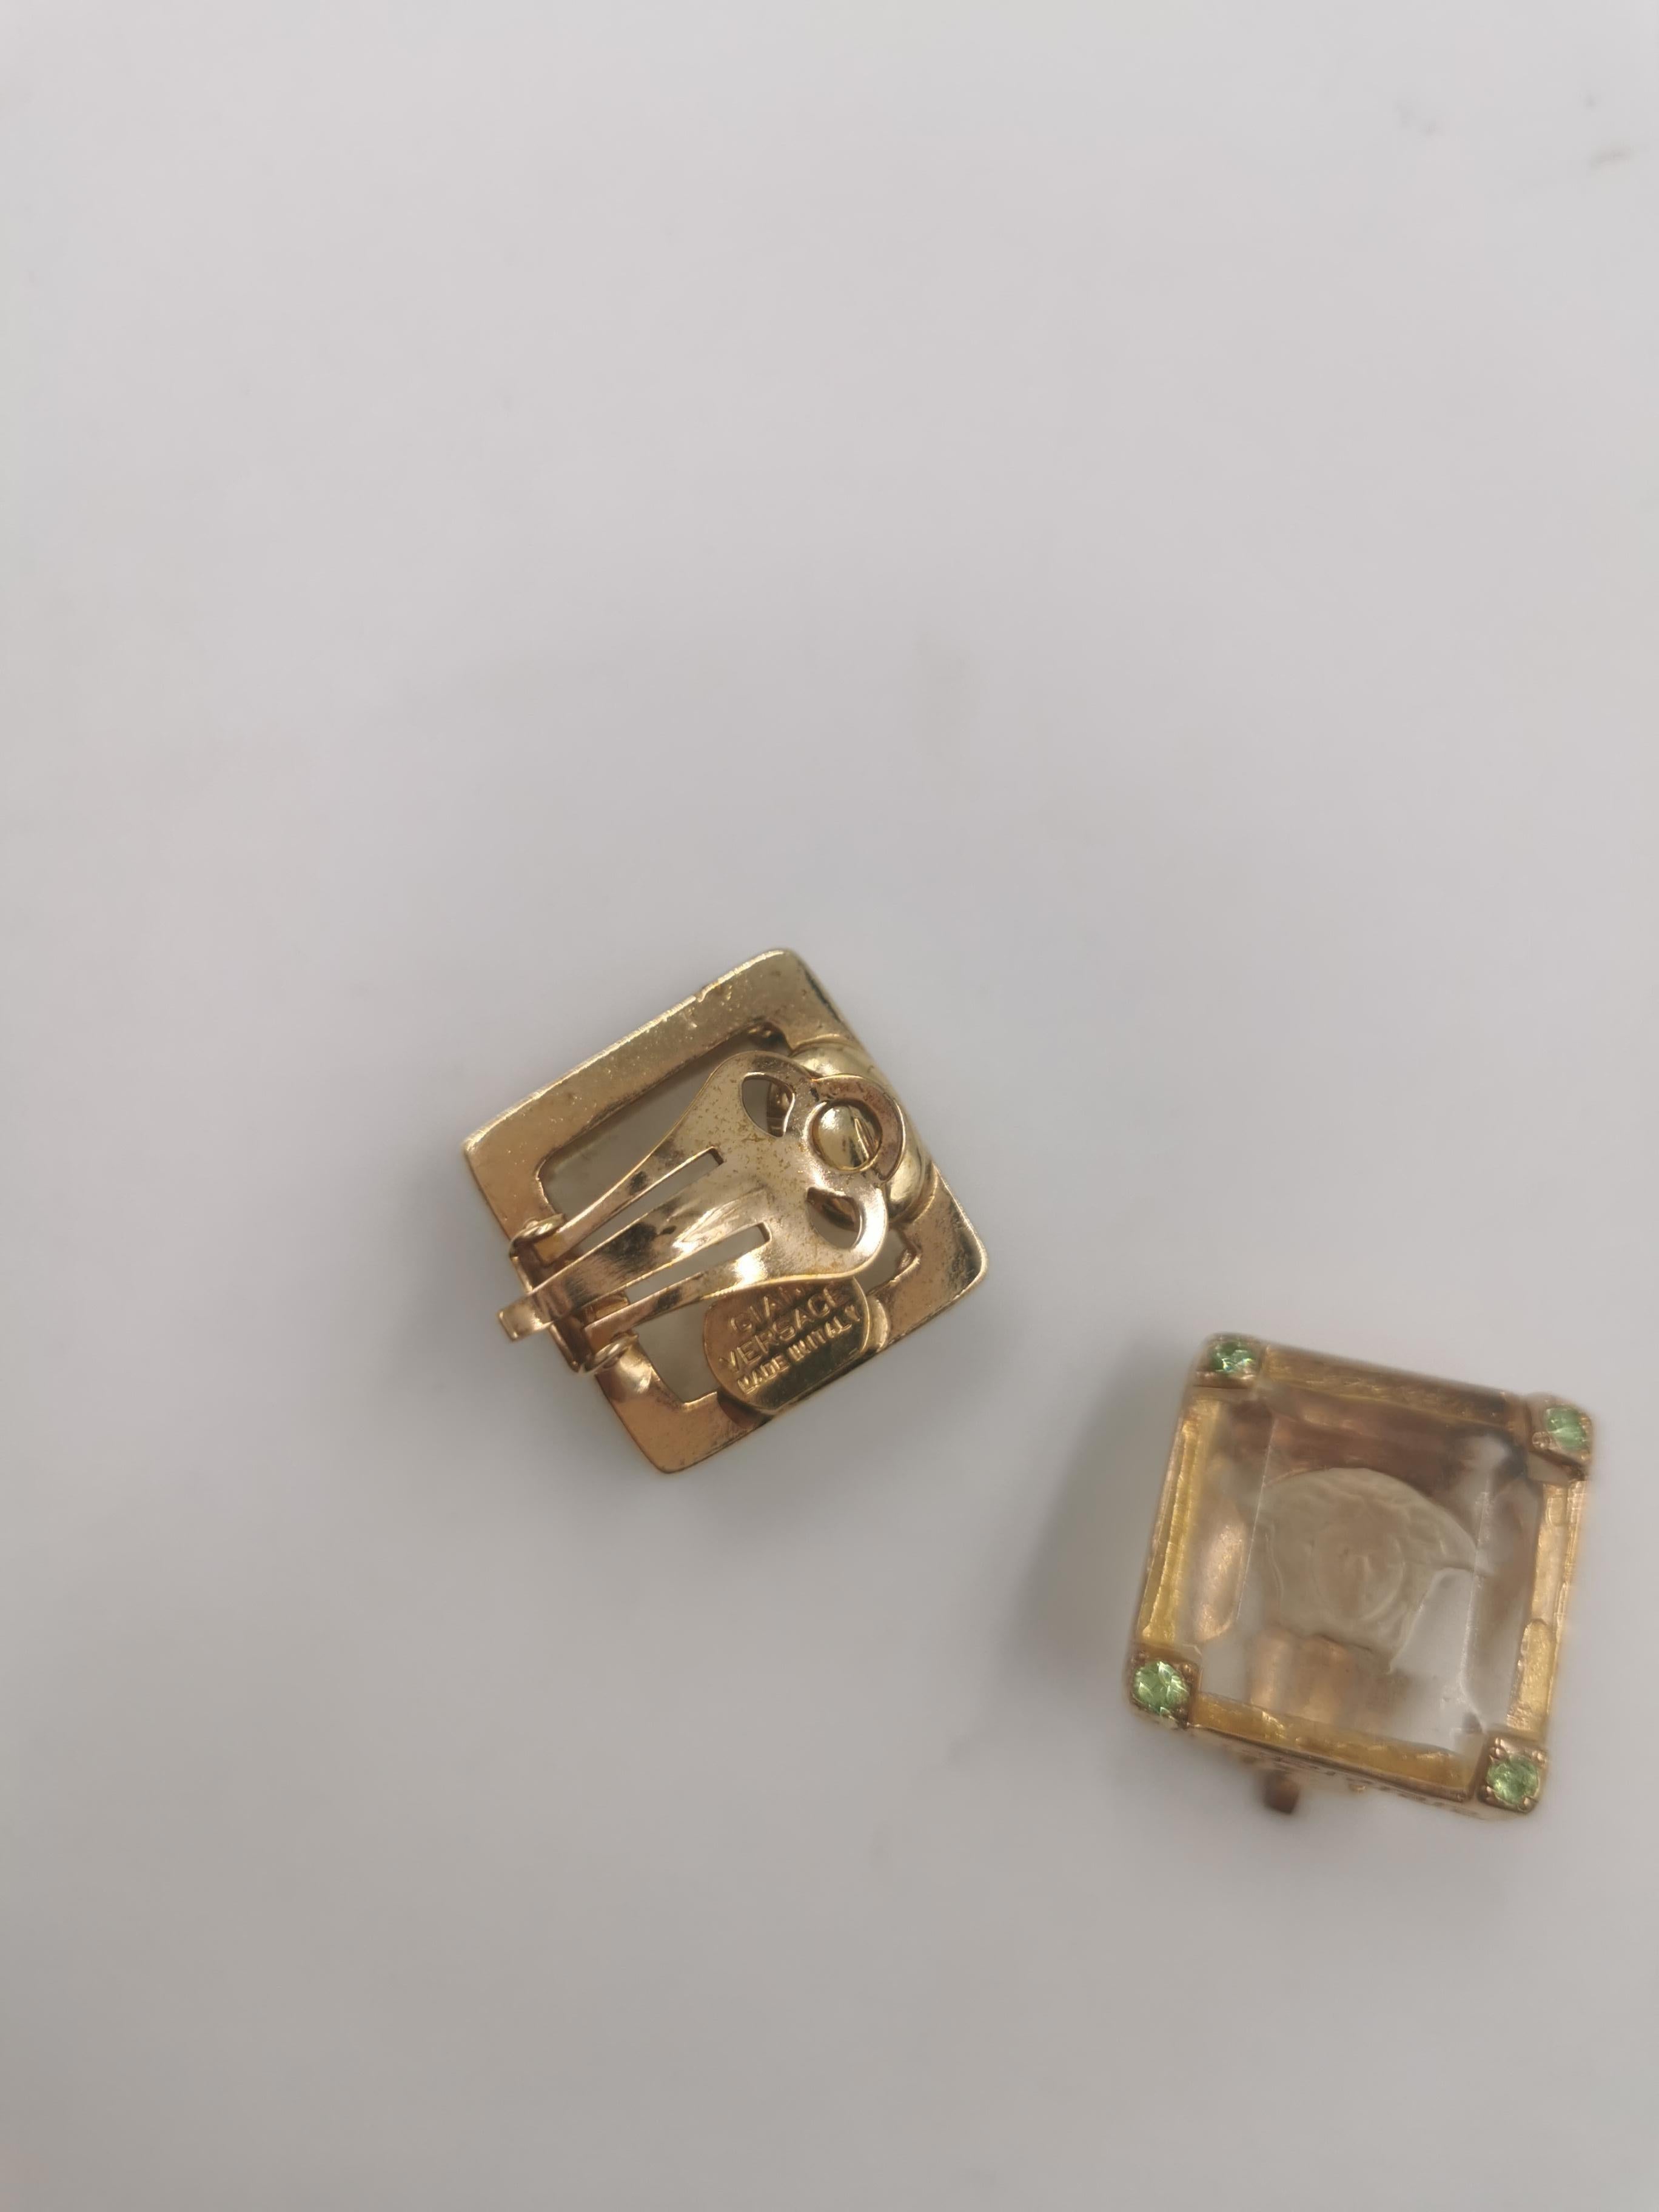 Etruscan Revival 1990's Gianni Versace Vintage Glass Medusa Gold Square Clip On Earrings RARE For Sale